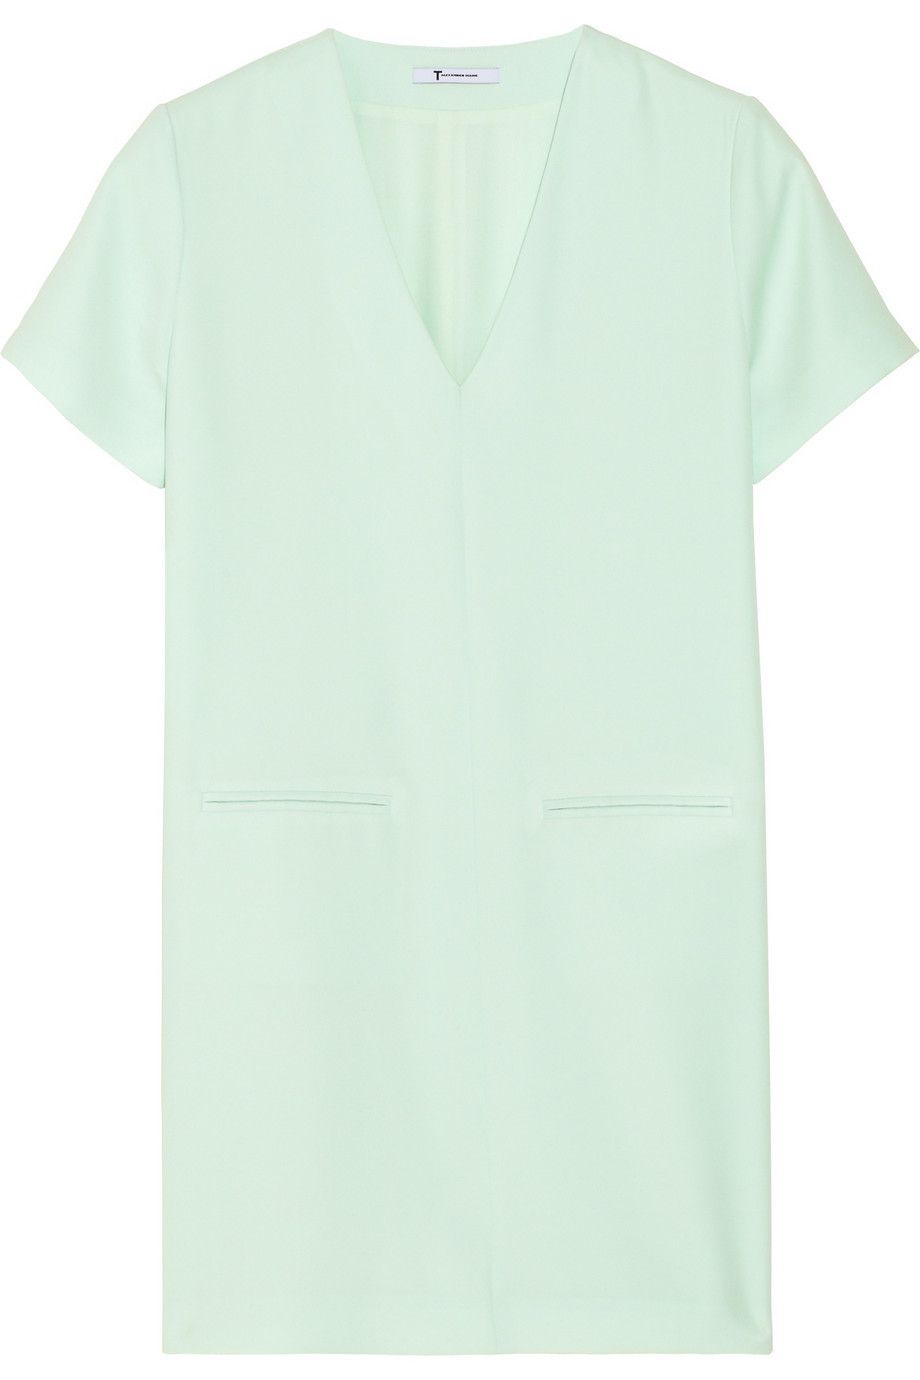 Product, Green, Sleeve, Collar, Text, Textile, White, Teal, Aqua, Font, 